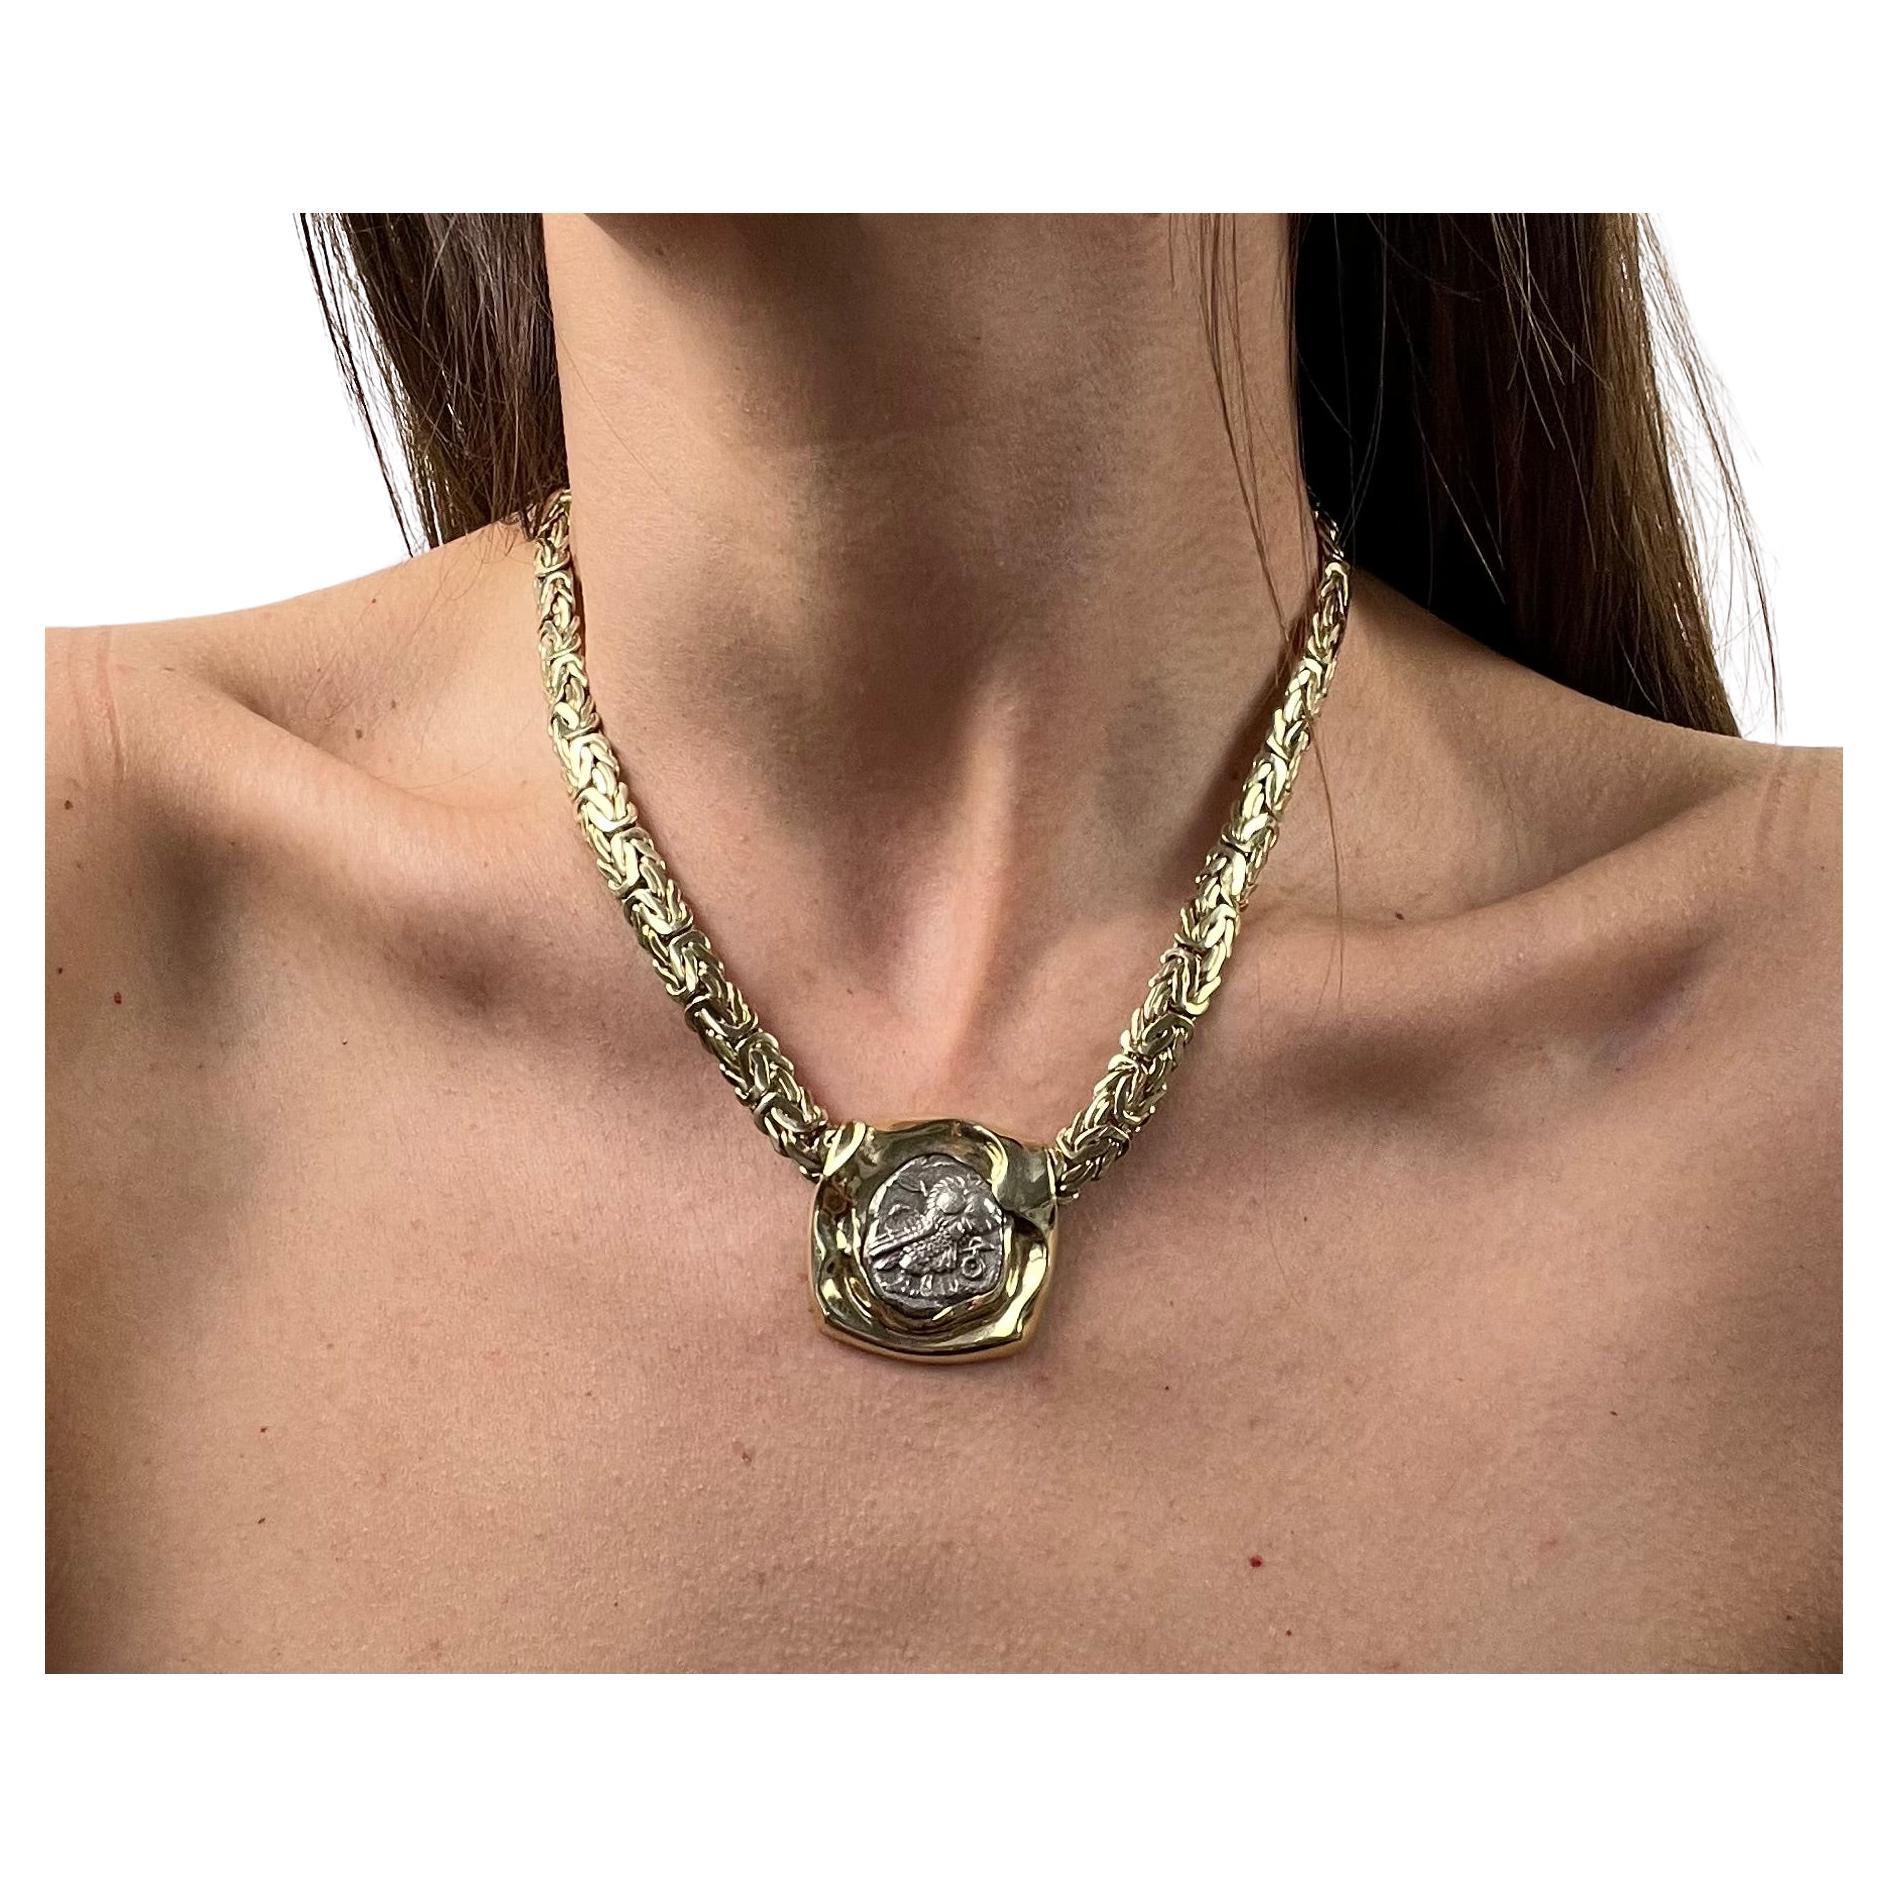 One 14 karat yellow gold Byzantine chain necklace set with one Ancient Greek Athena and the Owl Silver Tetradrachm circa 450 BC coin pendant. The necklace measures 16.5 inches long and is complete with a lobster claw clasp.  The necklace weighs 70.3